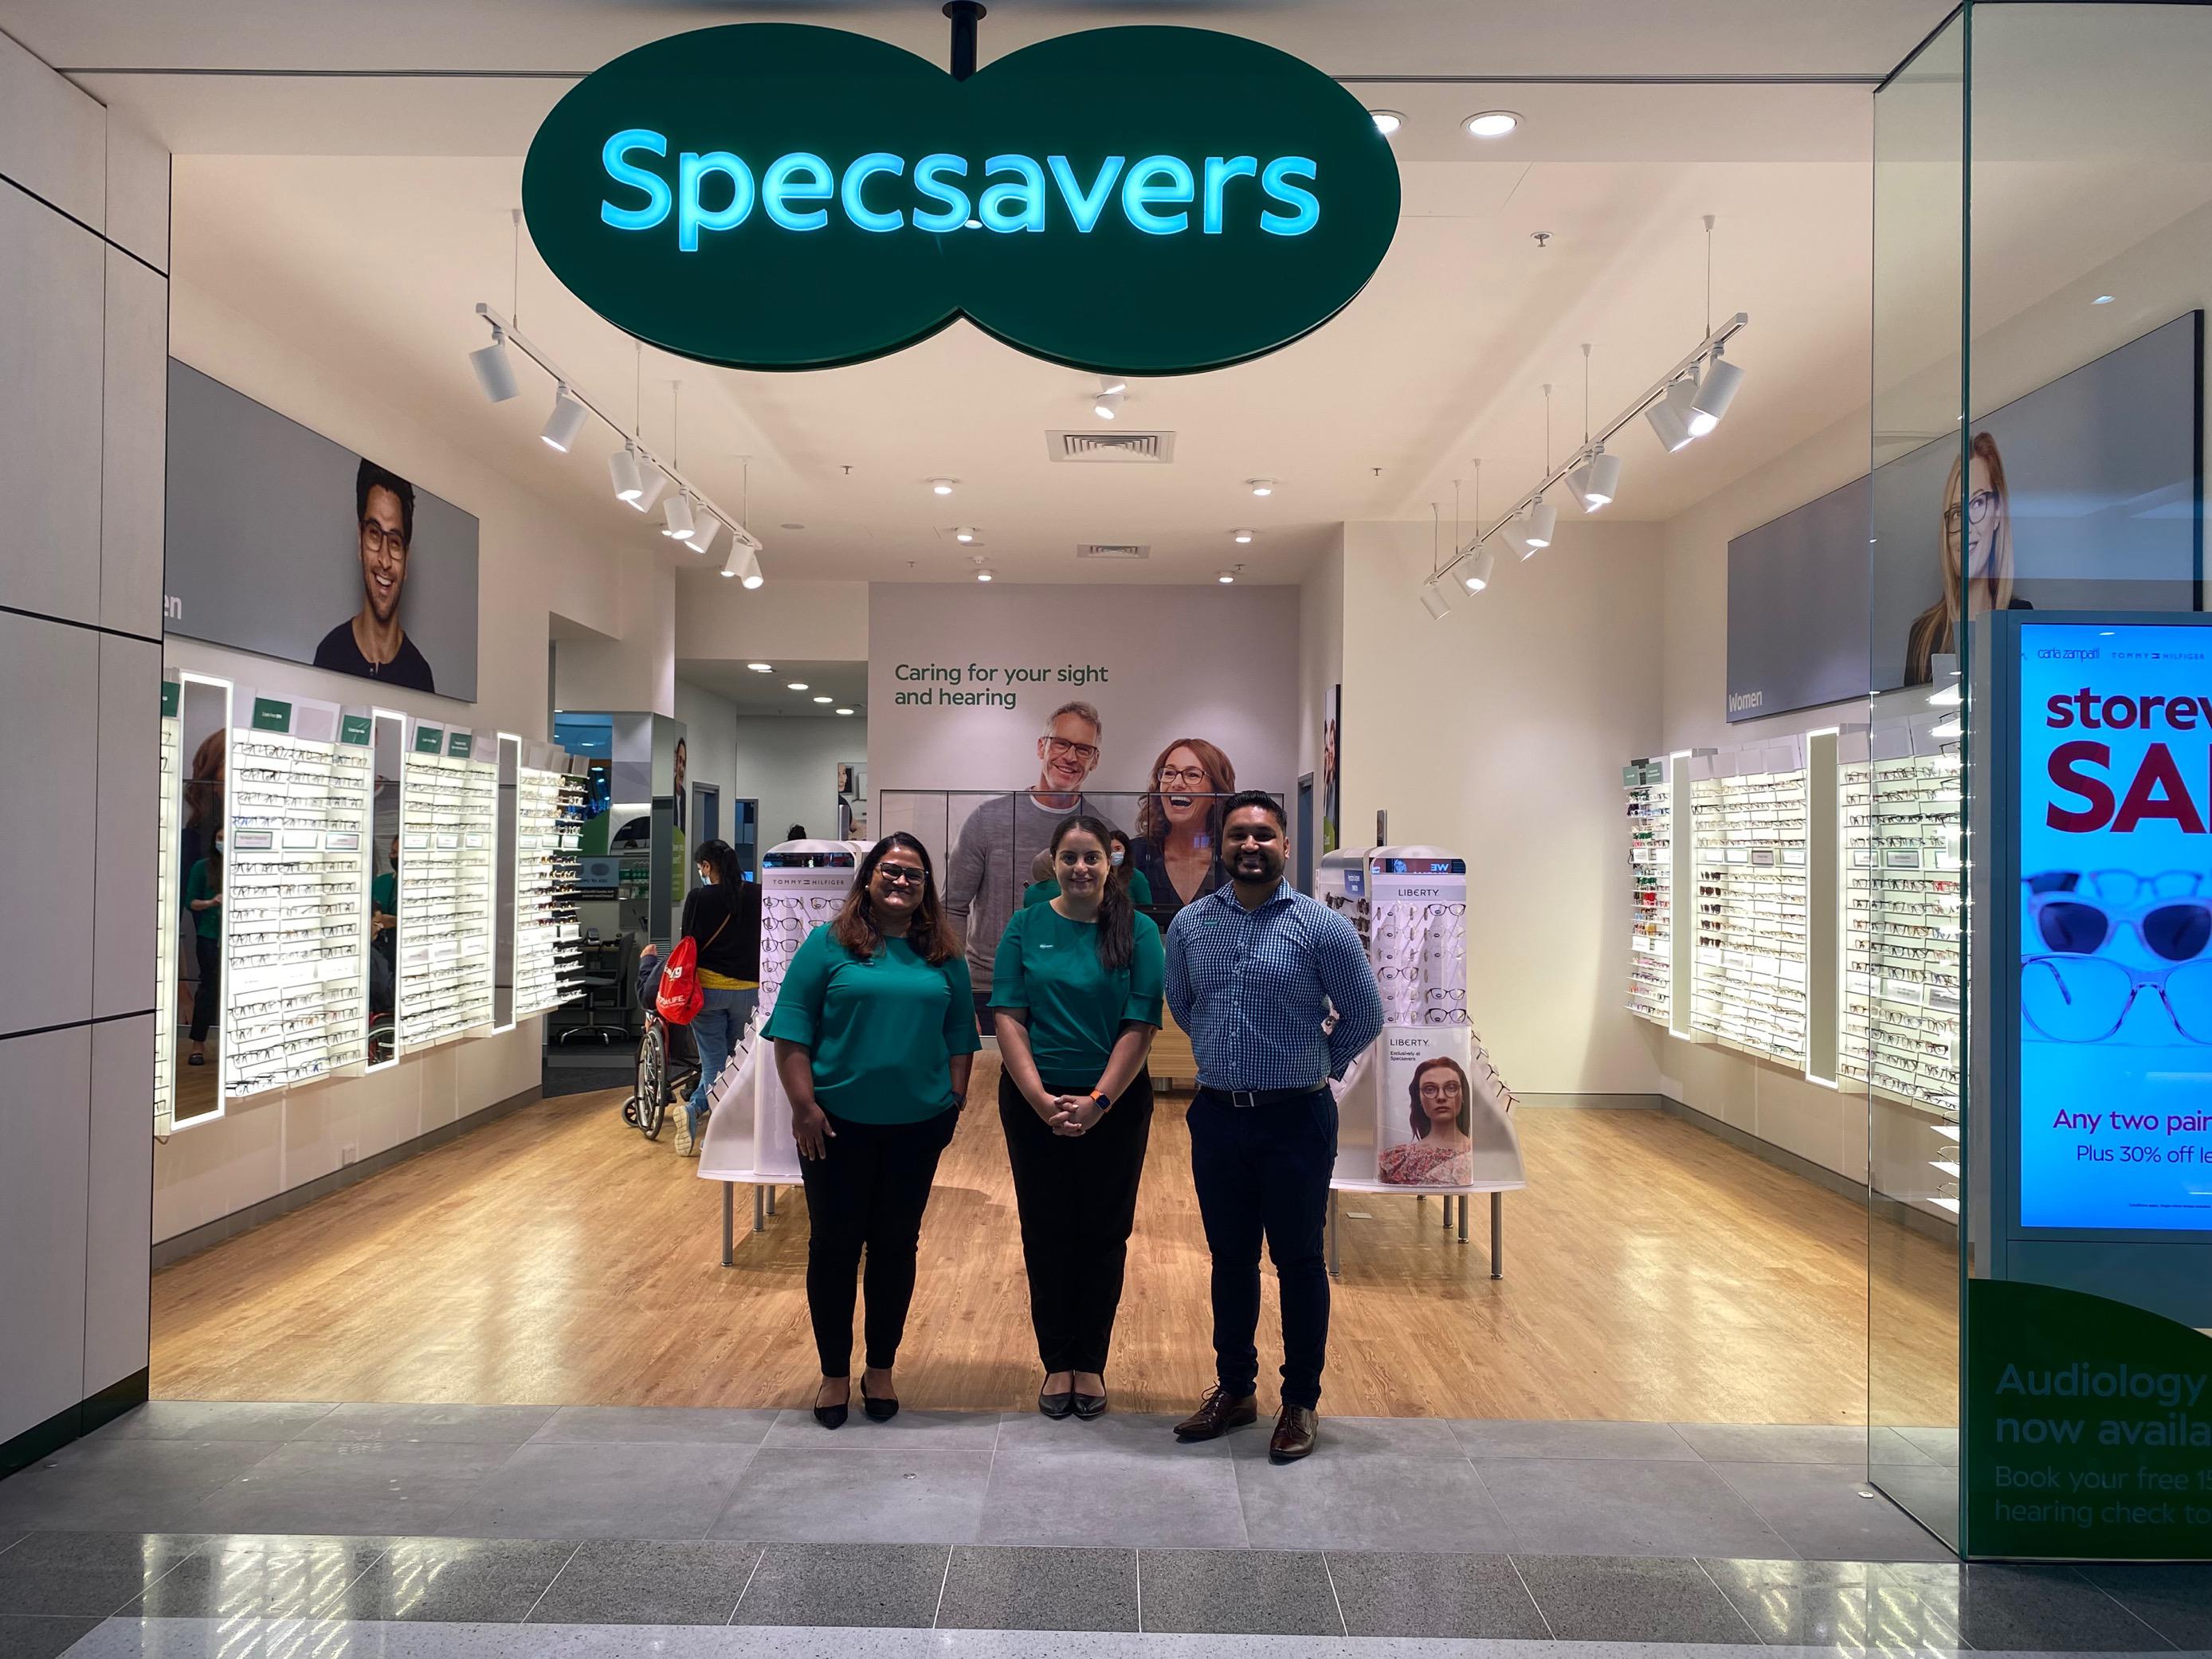 Images Specsavers Optometrists & Audiology - Merrylands Stockland